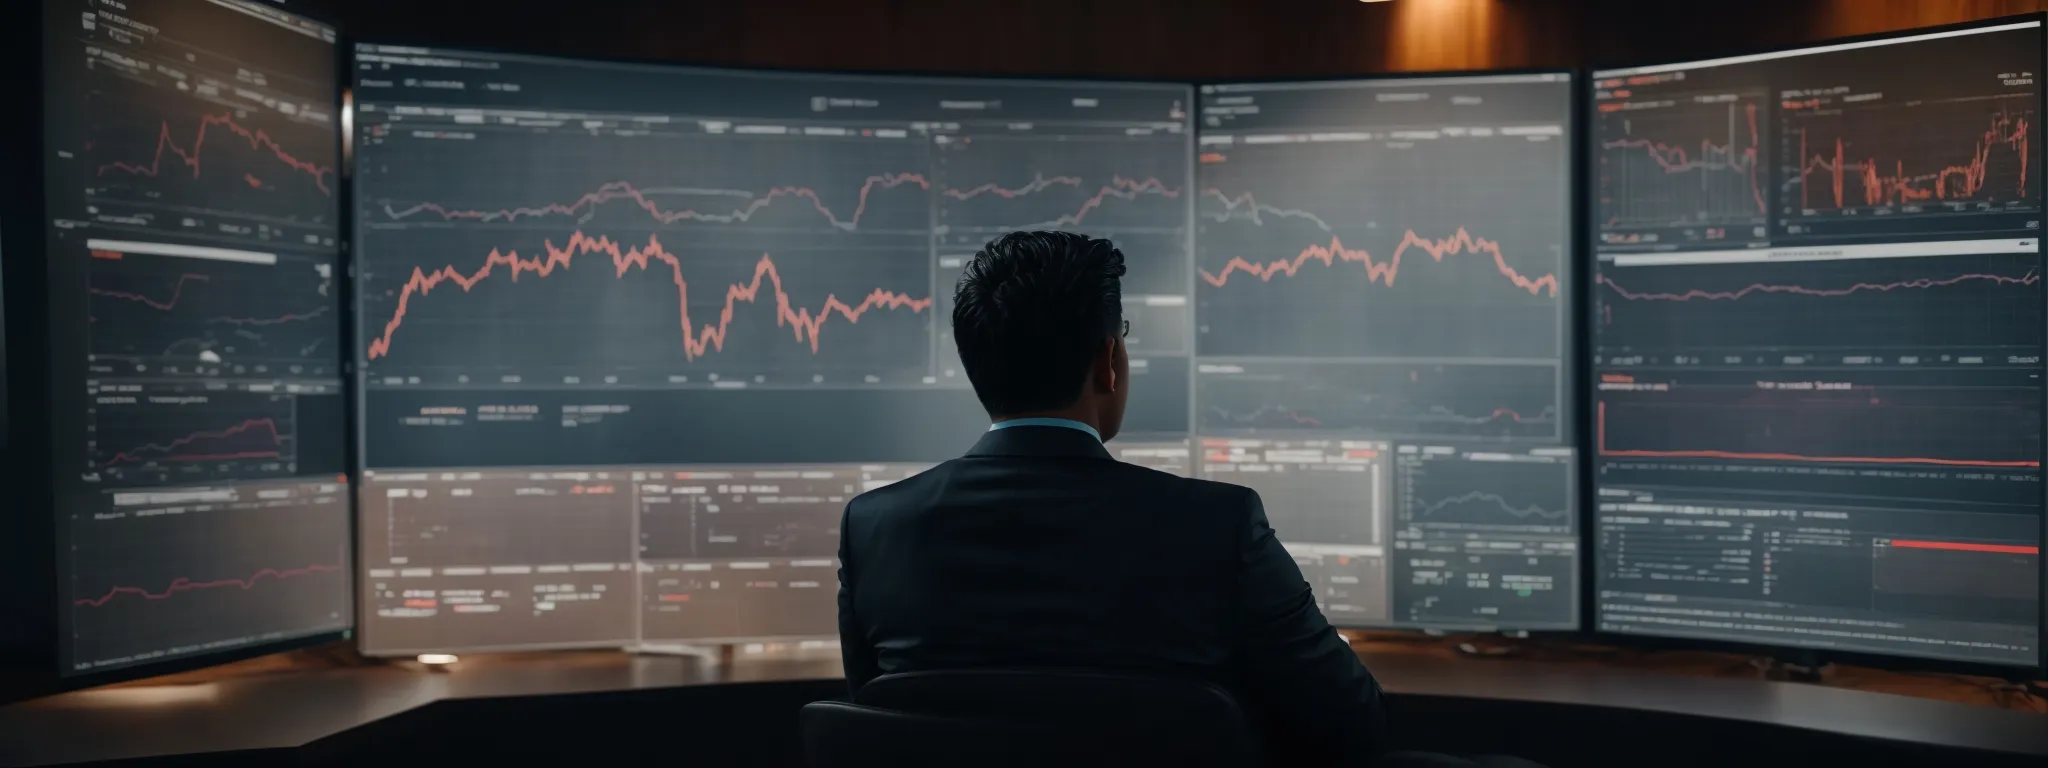 a marketer gazes at an expansive dashboard displaying graphs and data analytics, symbolizing the strategic insights gained from a keyword research tool api.